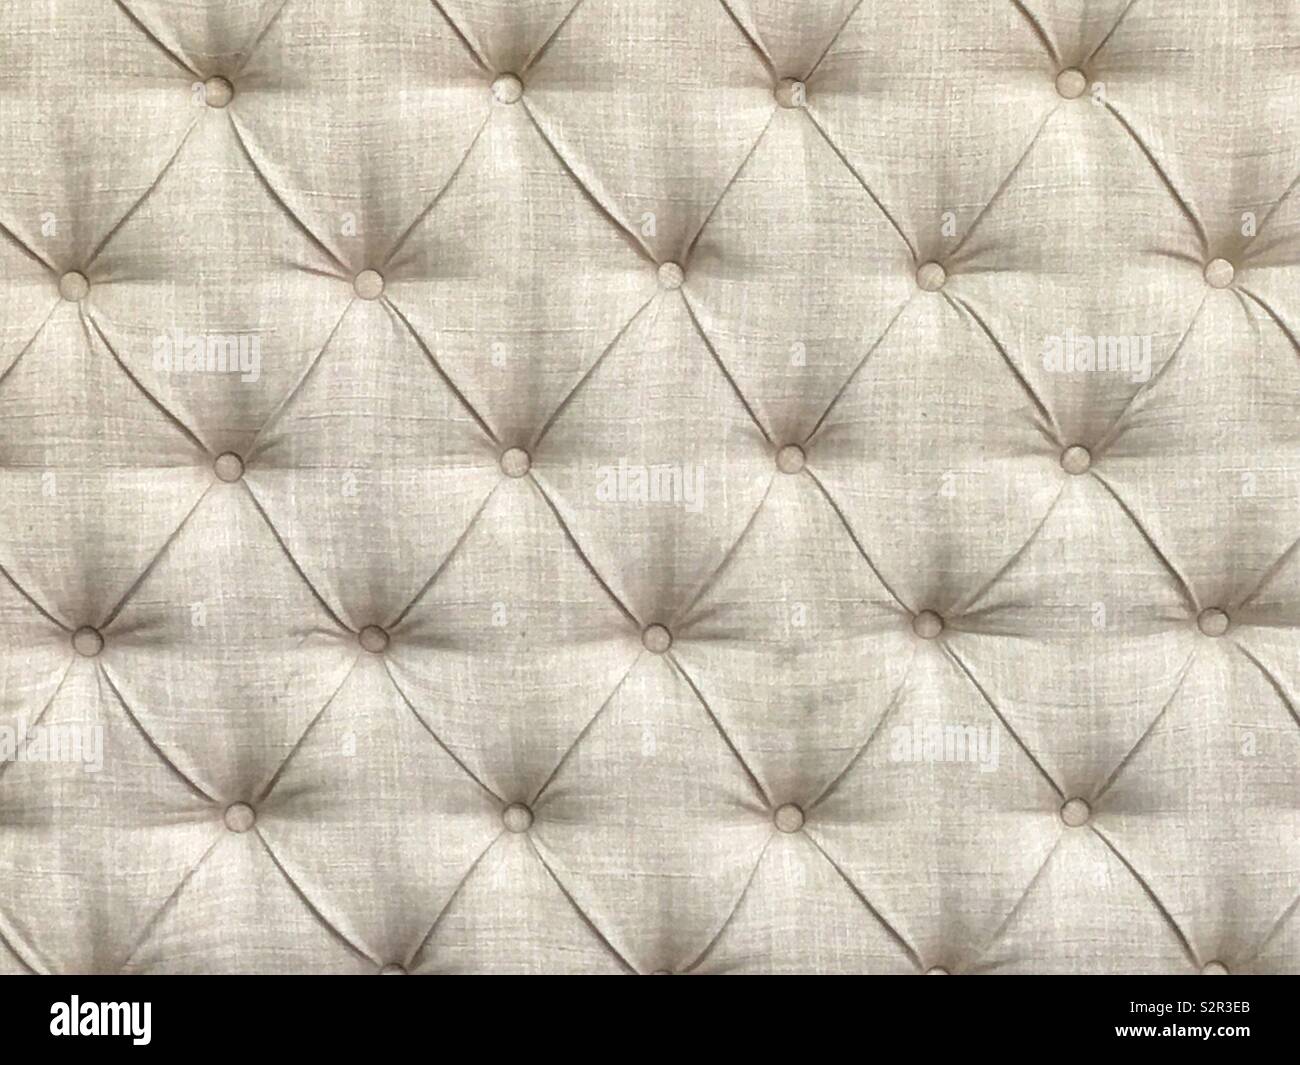 Finely tailored upholstery of white grey furniture with diagonal decoration and buttons. Stock Photo